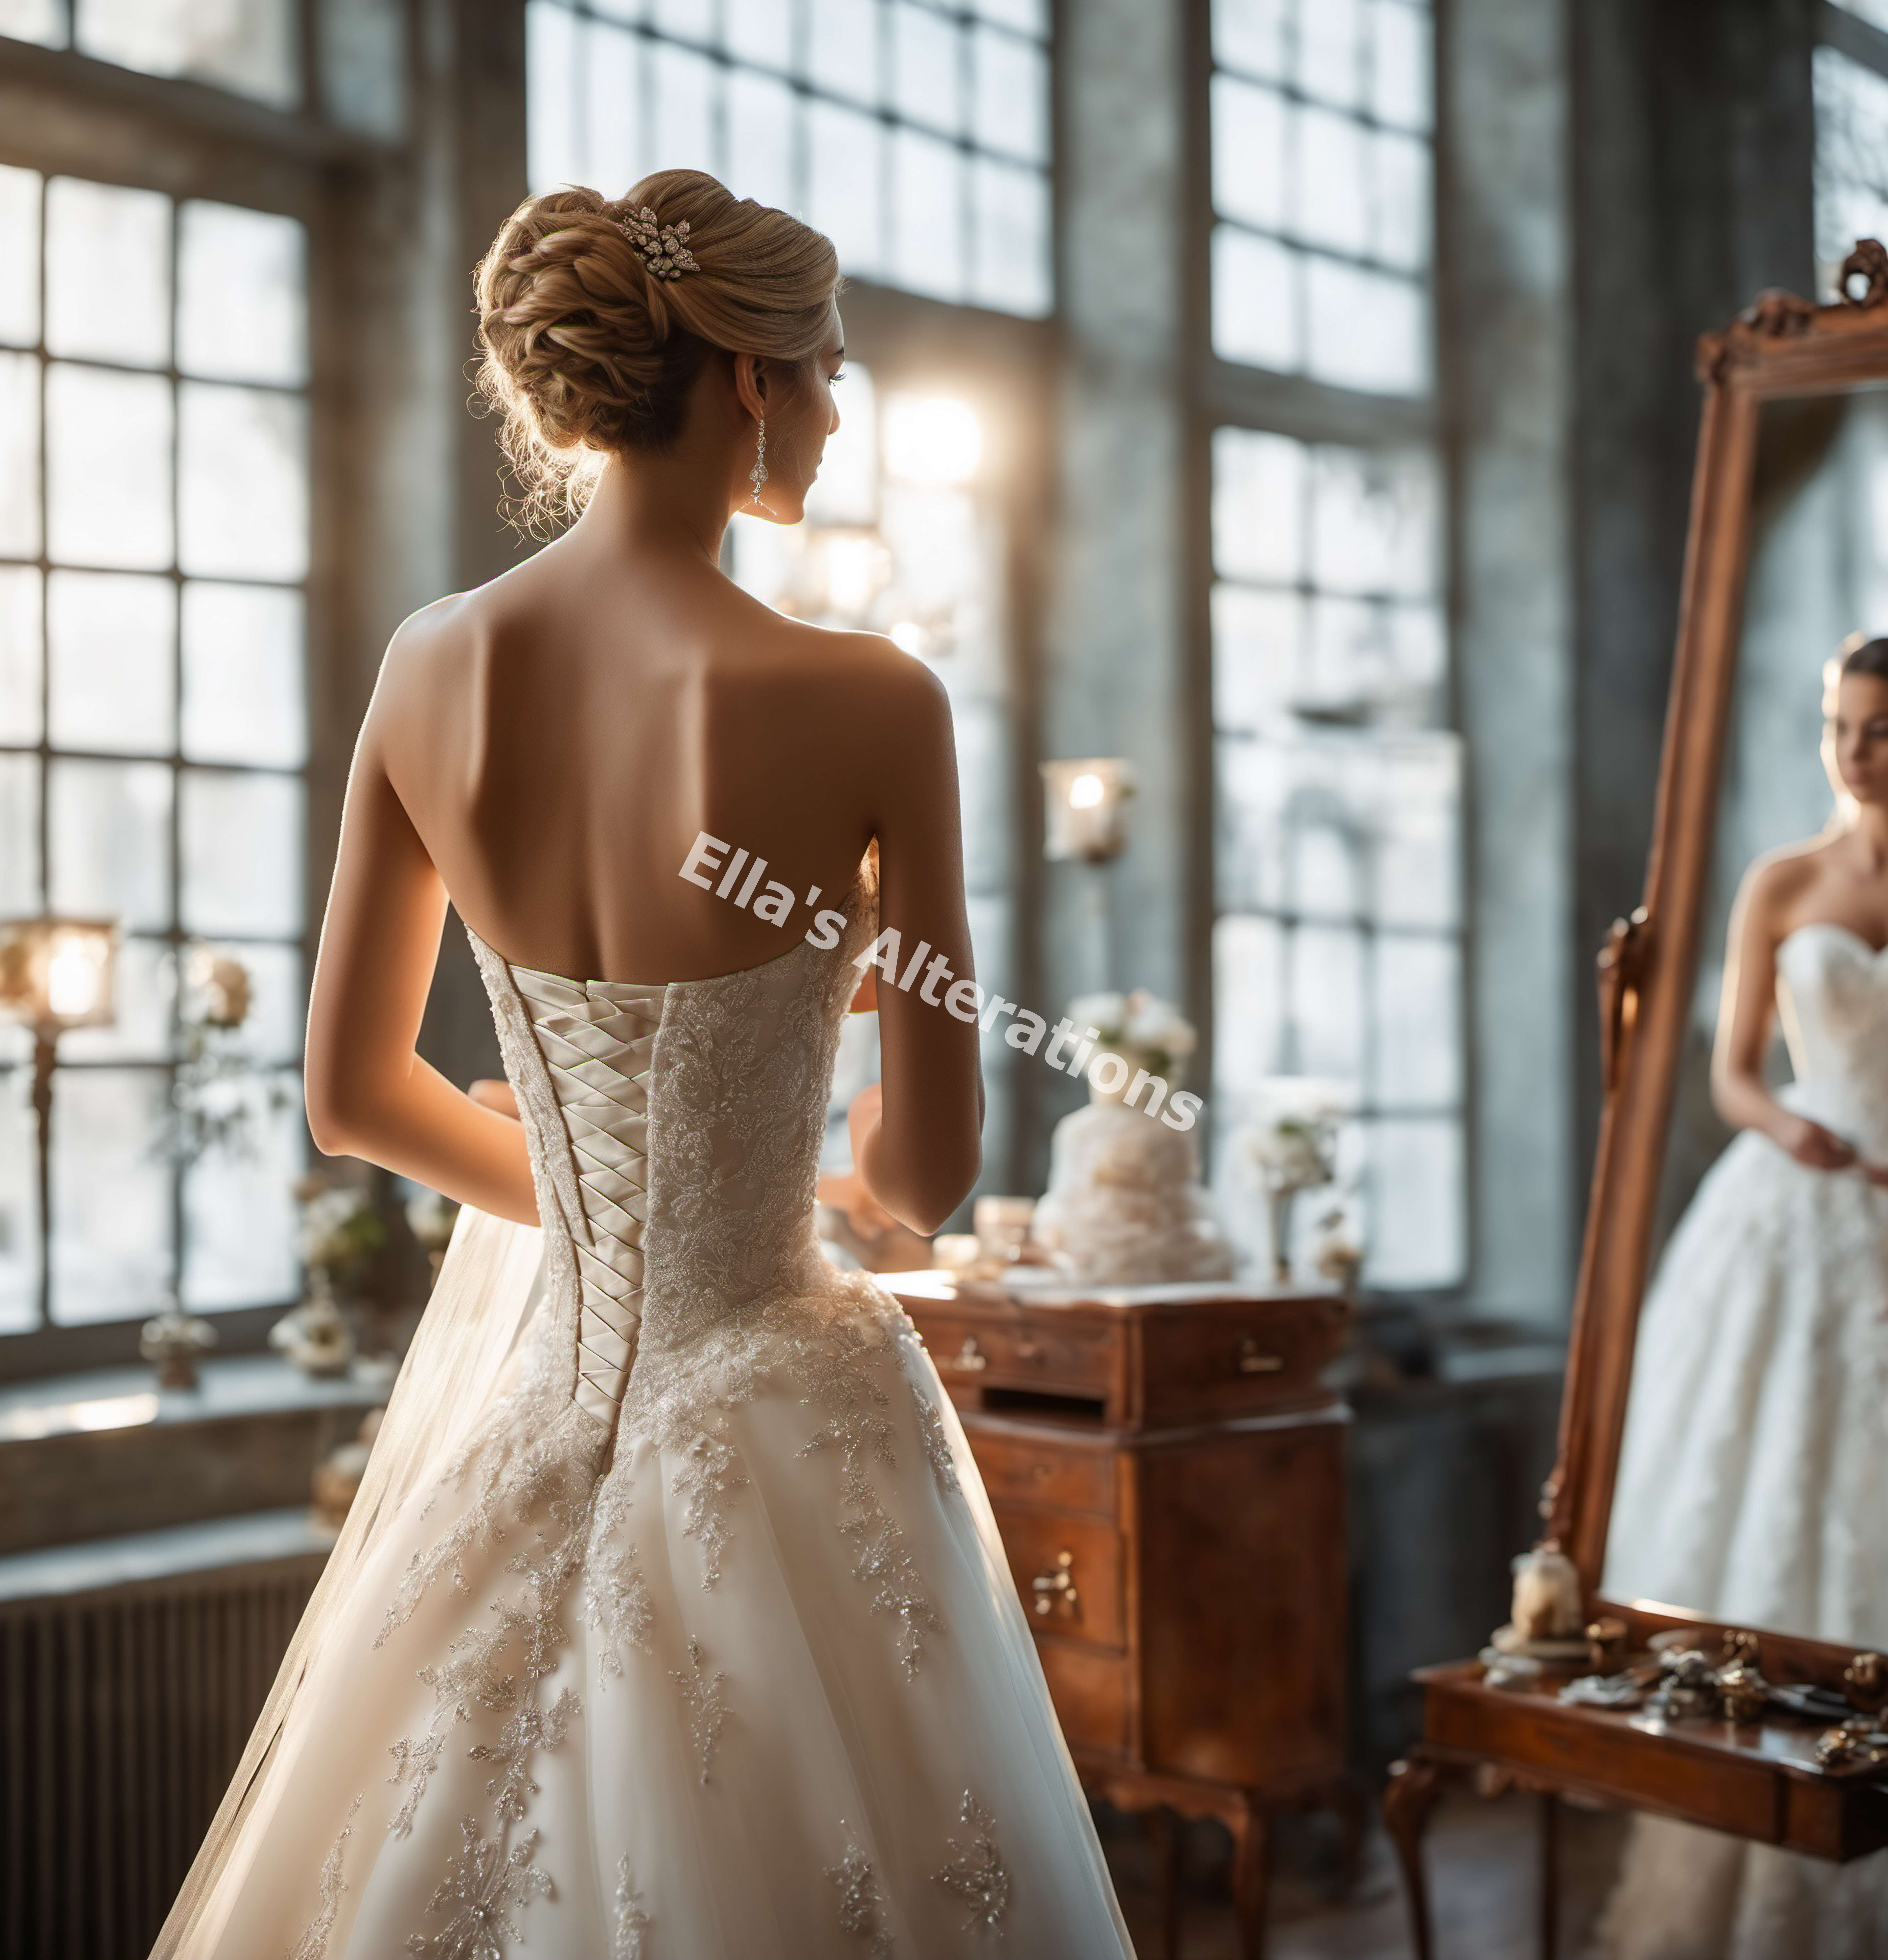 Wedding Dress Alterations in Salem, OR | The Bridal Gallery